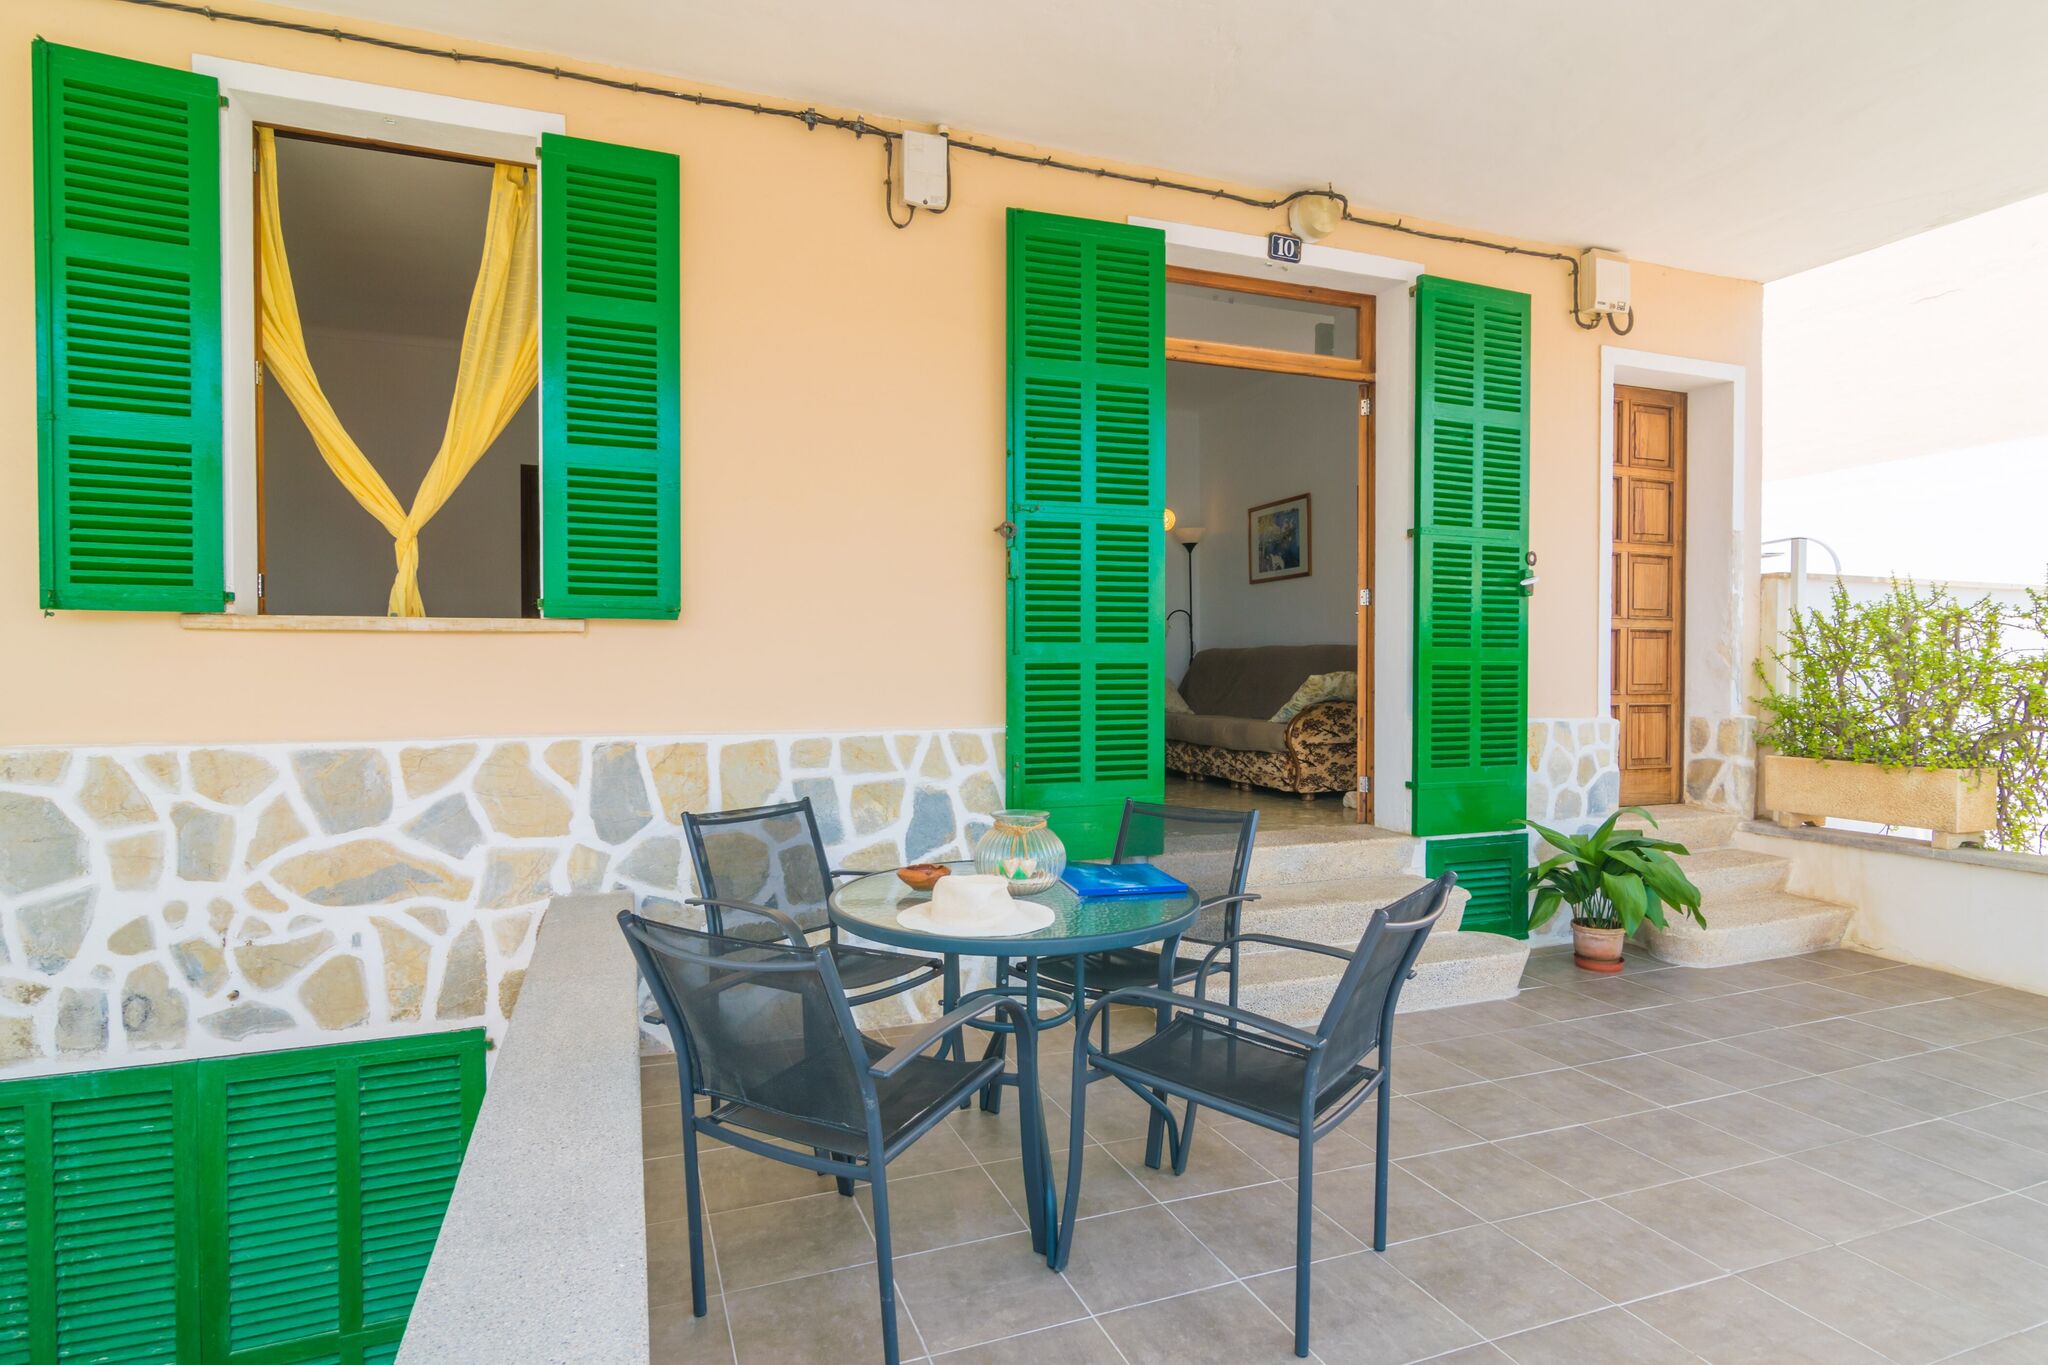 CASA TRADICIONAL CAN PICAFORT - Apartment for 6 people in Ca'n Picafort.